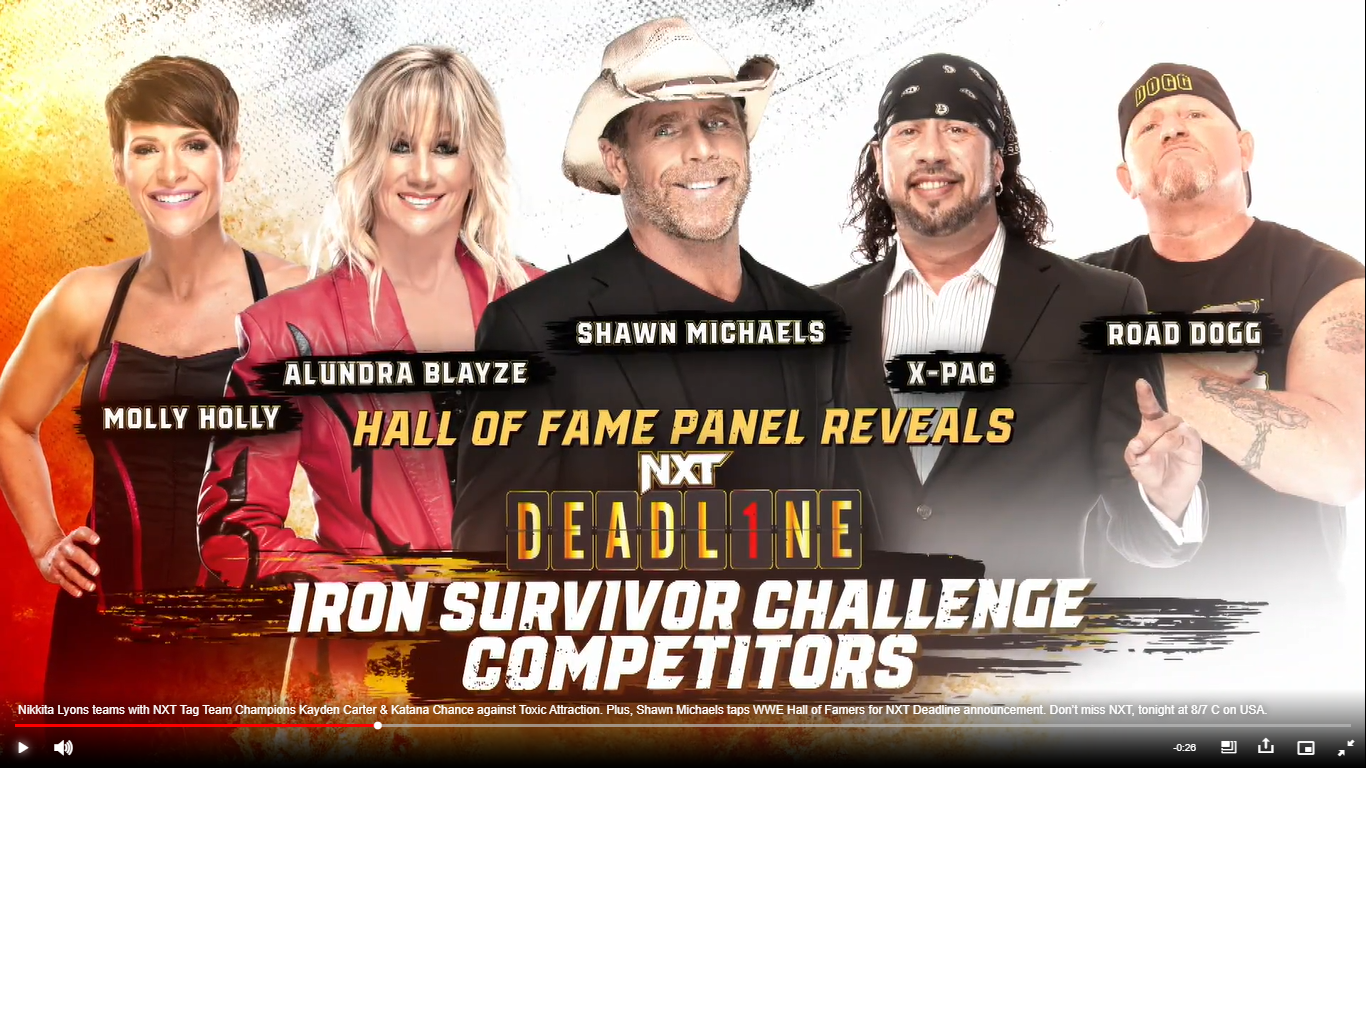 “Heartbreak Man” Shawn Michaels and his all-star panel to select the entrants in the Iron Survivor matches at NXT Deadline